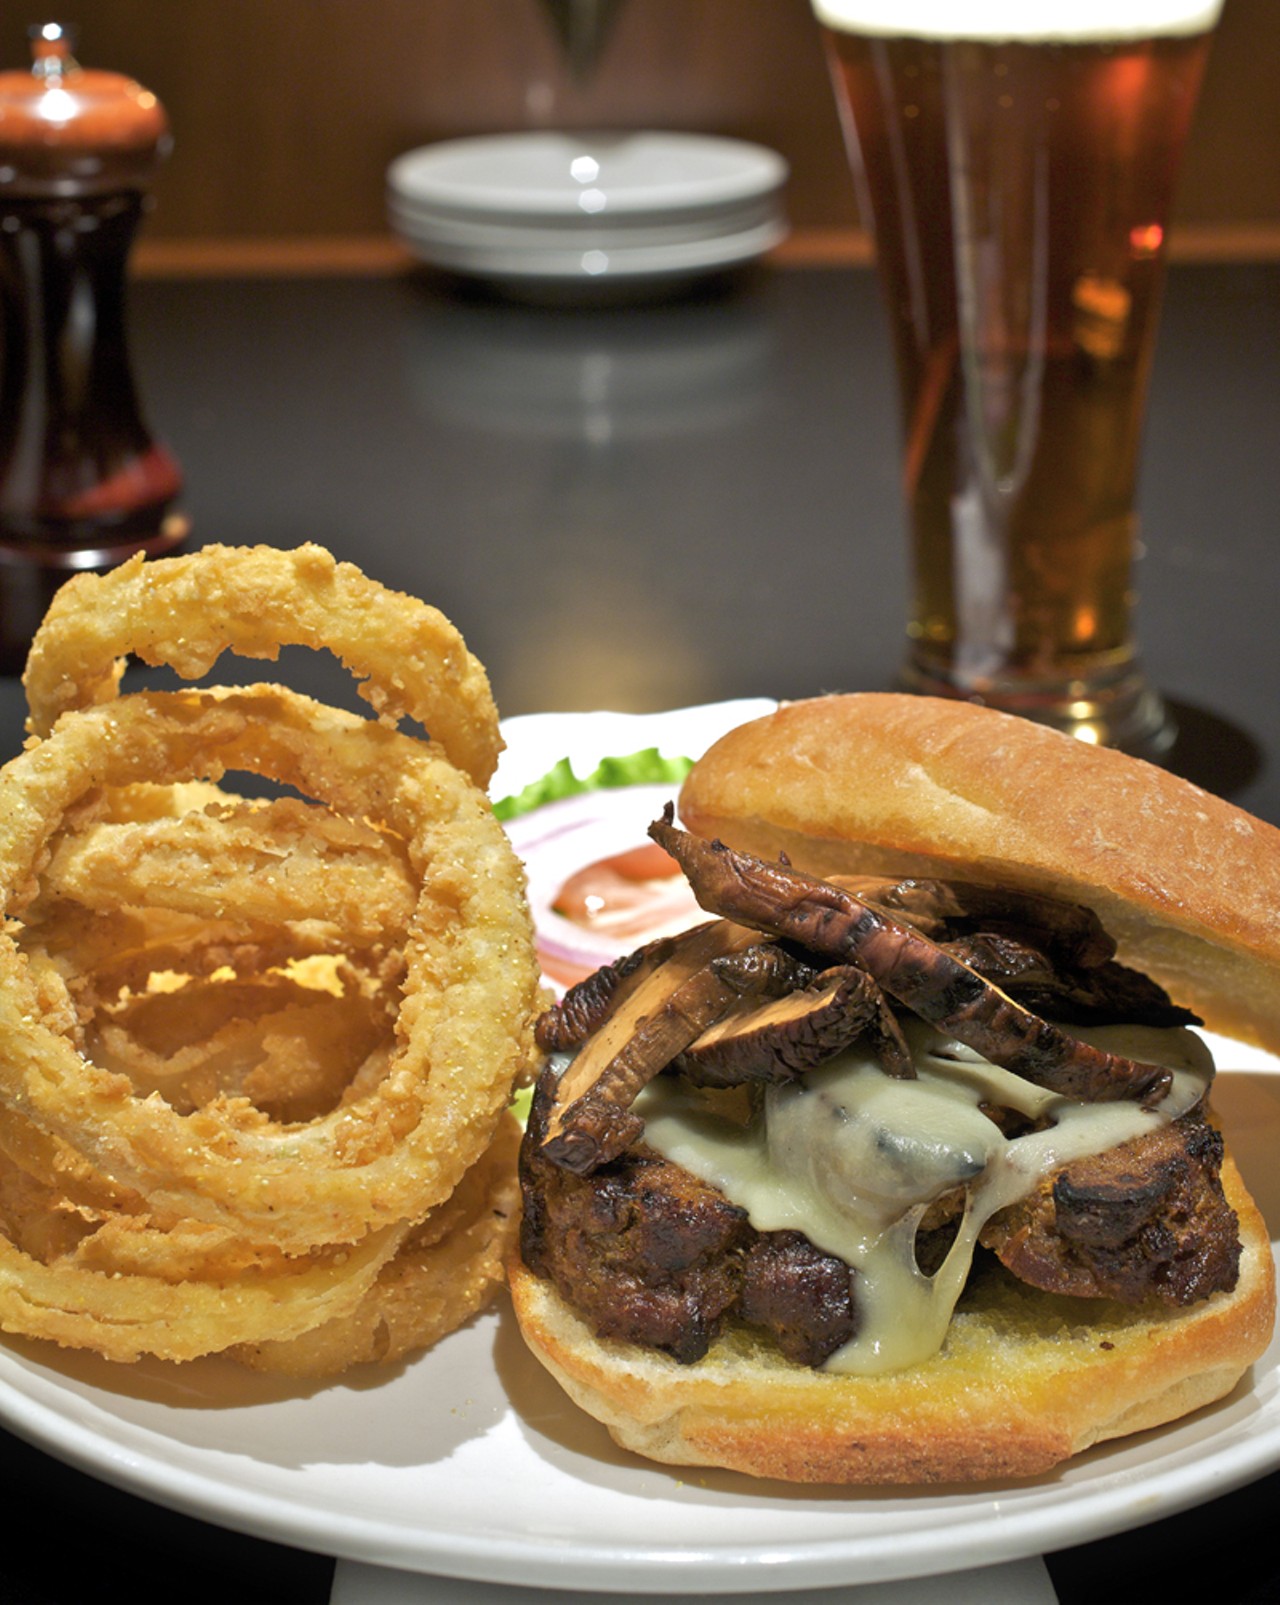 The grilled meatloaf sandwich is served with wild mushrooms, Swiss cheese and chipotle ranch dressing on a ciabatta roll. It is shown here with onion rings.